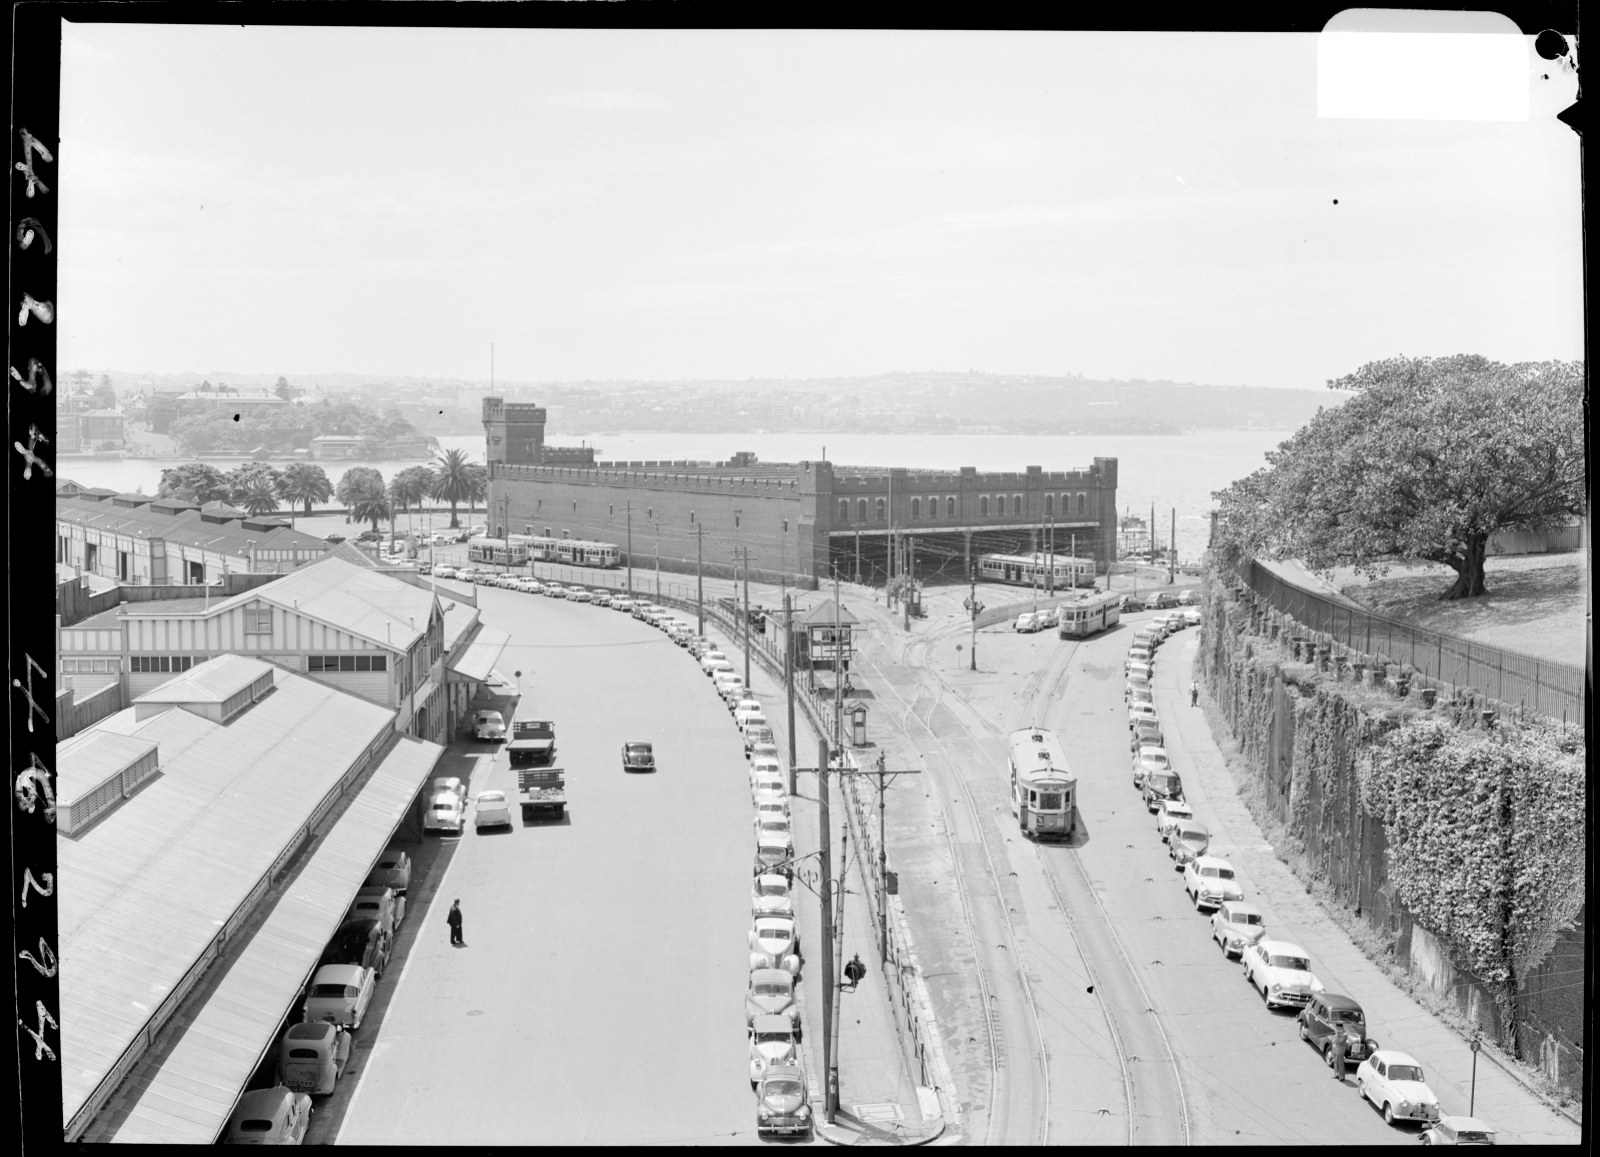 Proposed site for opera house at Bennelong Point. Government Printing Office, 7 November 1955. STATE ARCHIVES OF NSW: NRS-21689-2-6-GPO2_07021